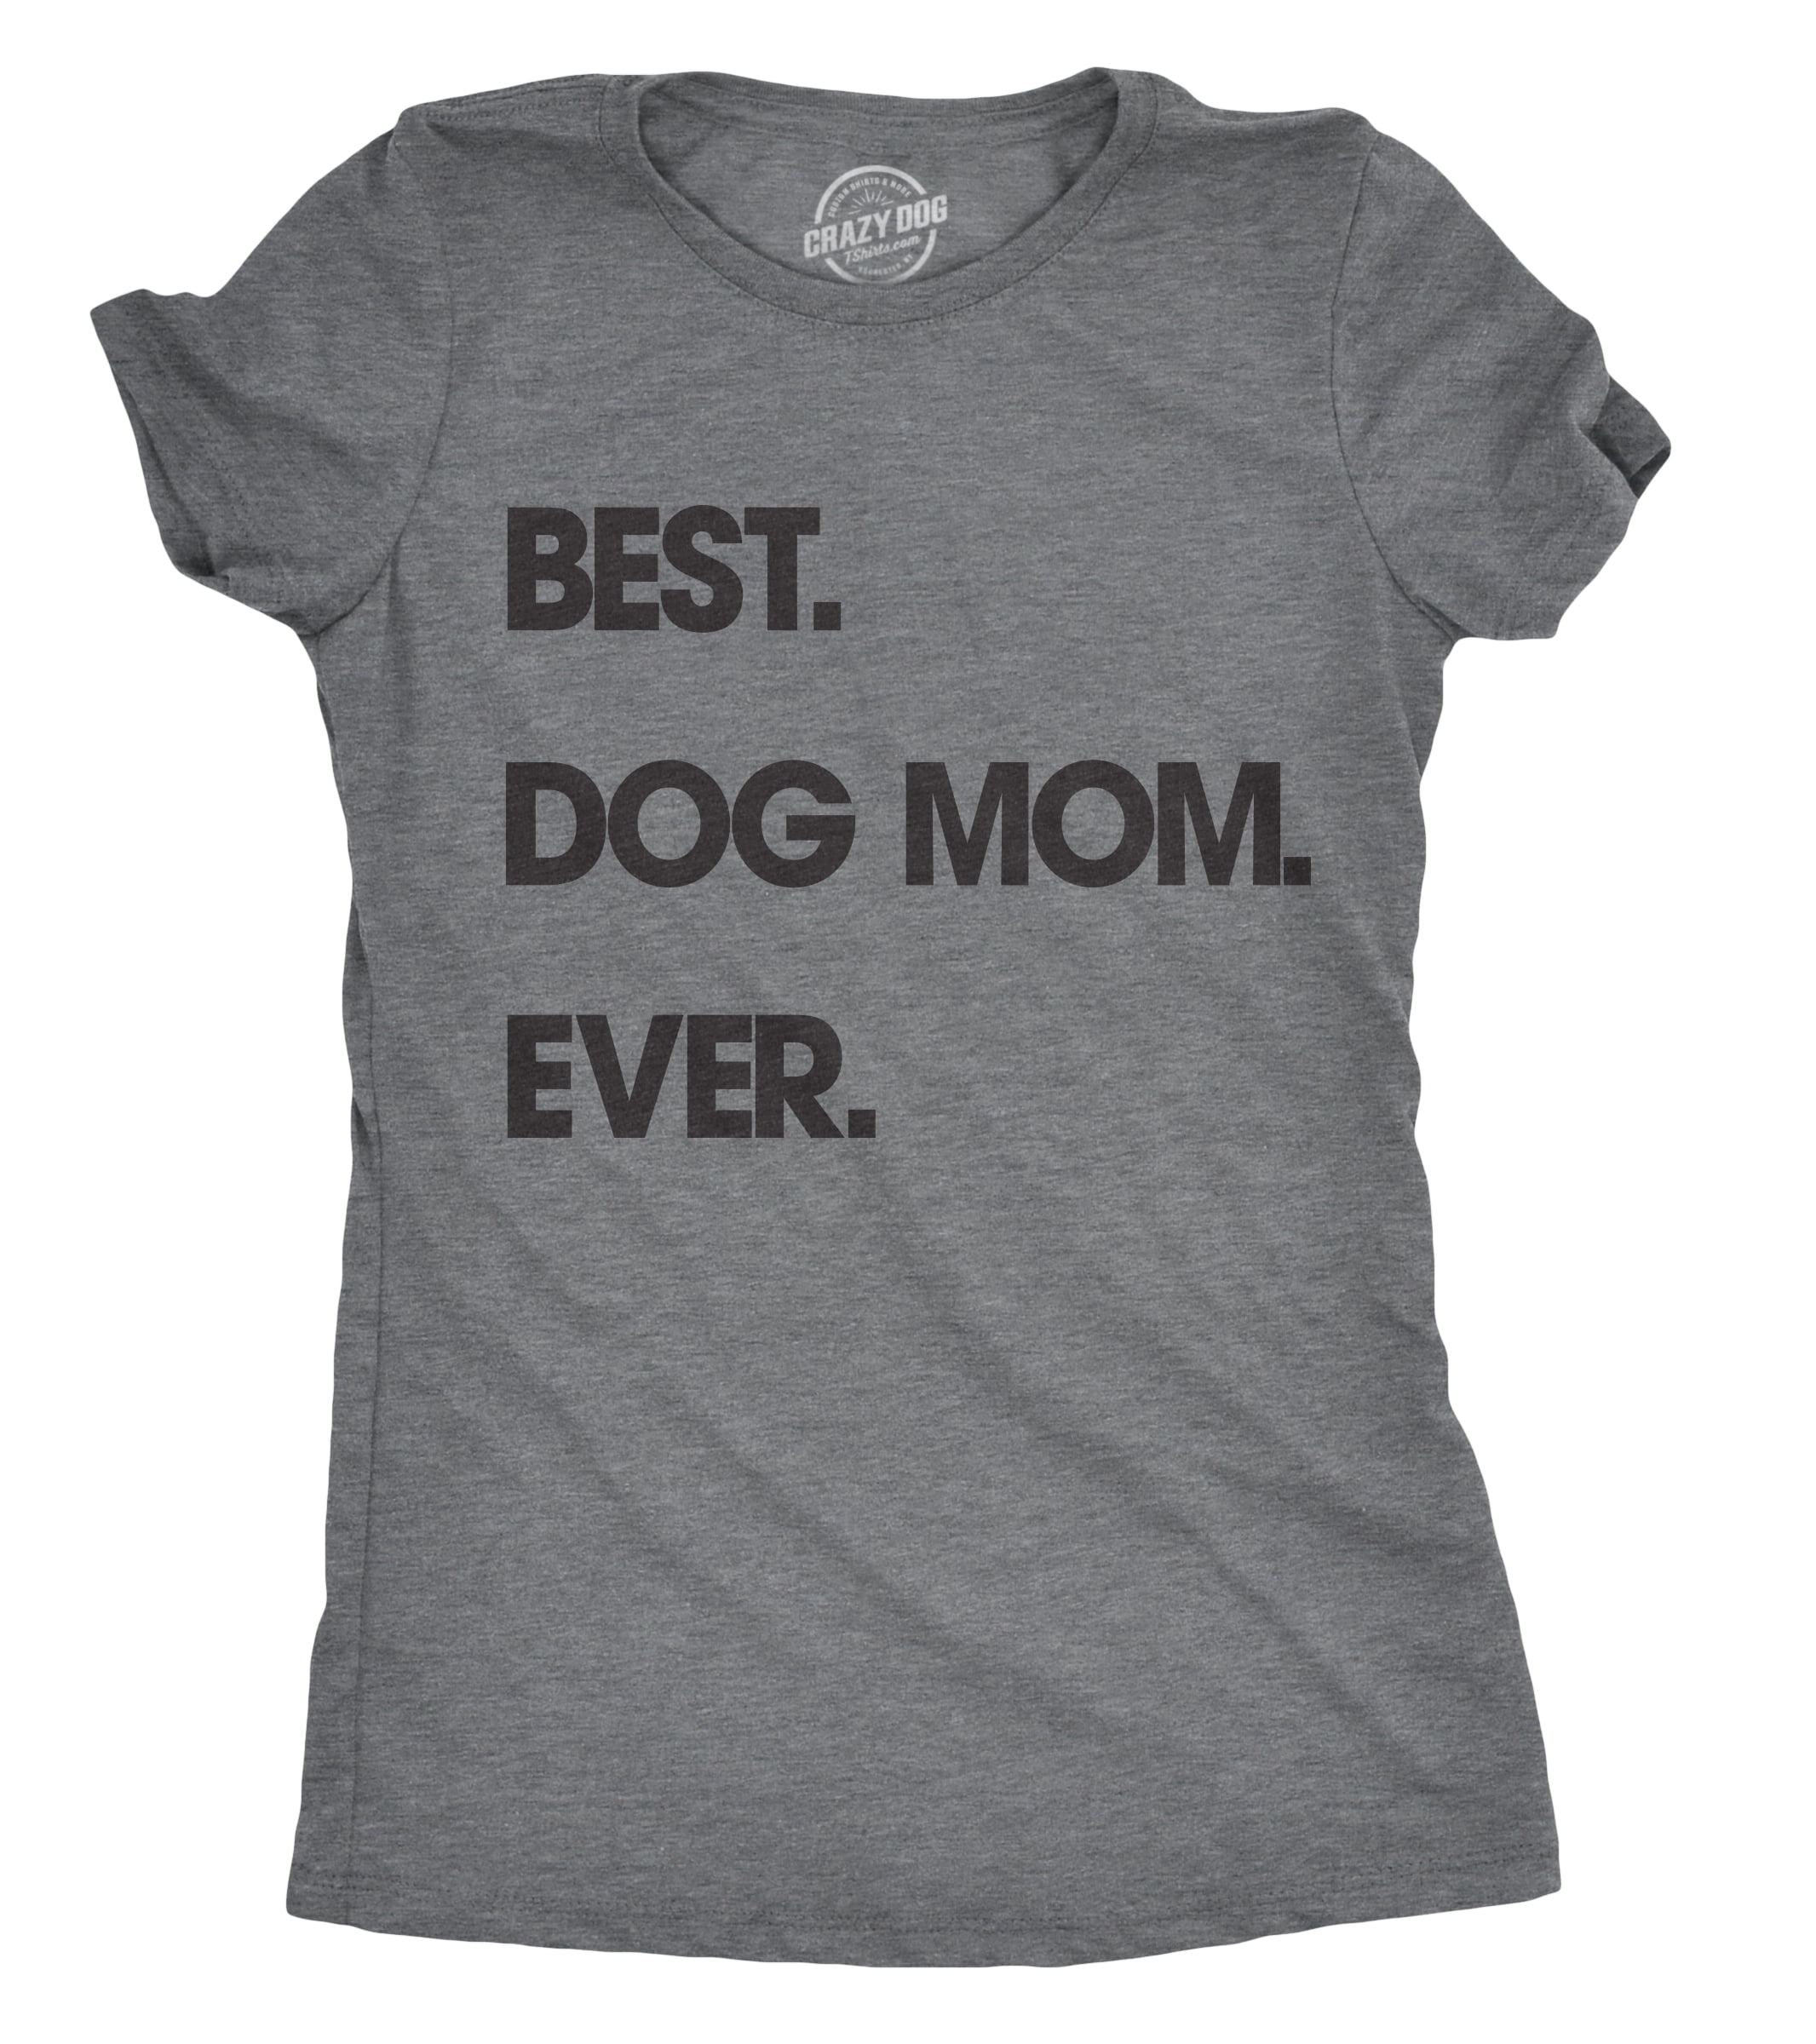 Best Dog Mom Shirt Always Be Positive Shirt for Woman Gift for Dog Lovers Dog Owners Shirt Dog Shirts Think Positive